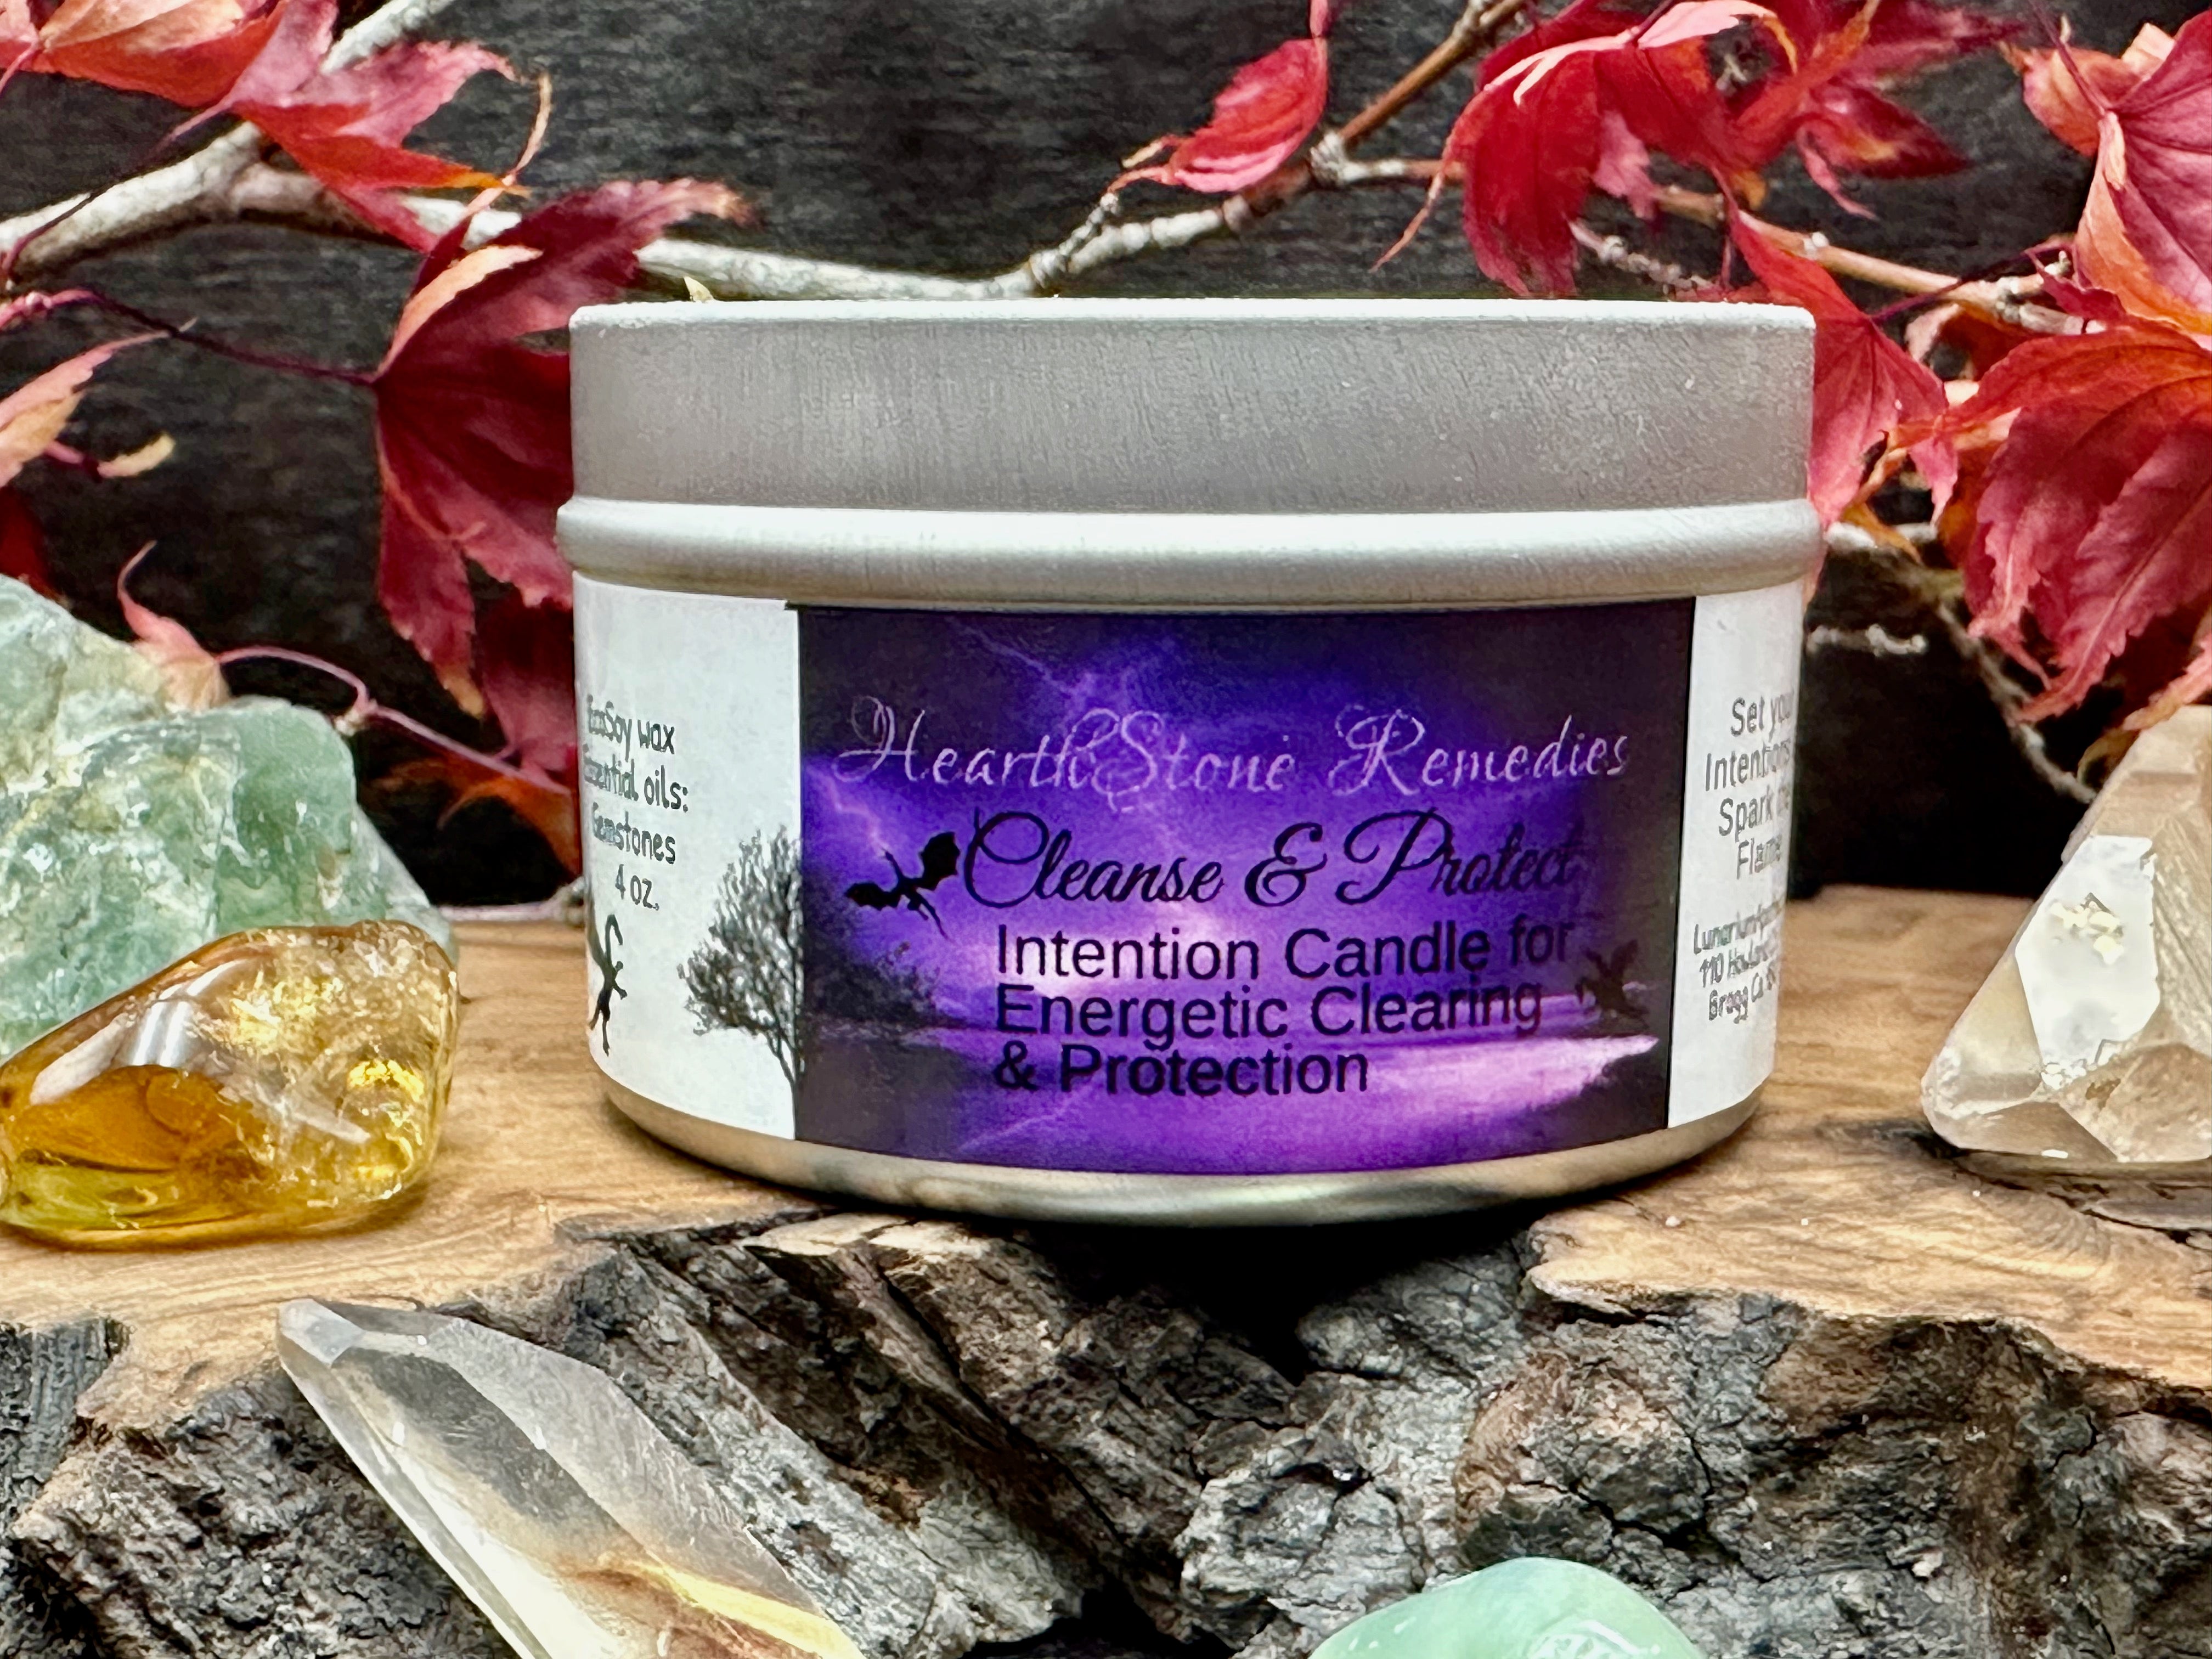 Cleanse & Protect Intention Candle